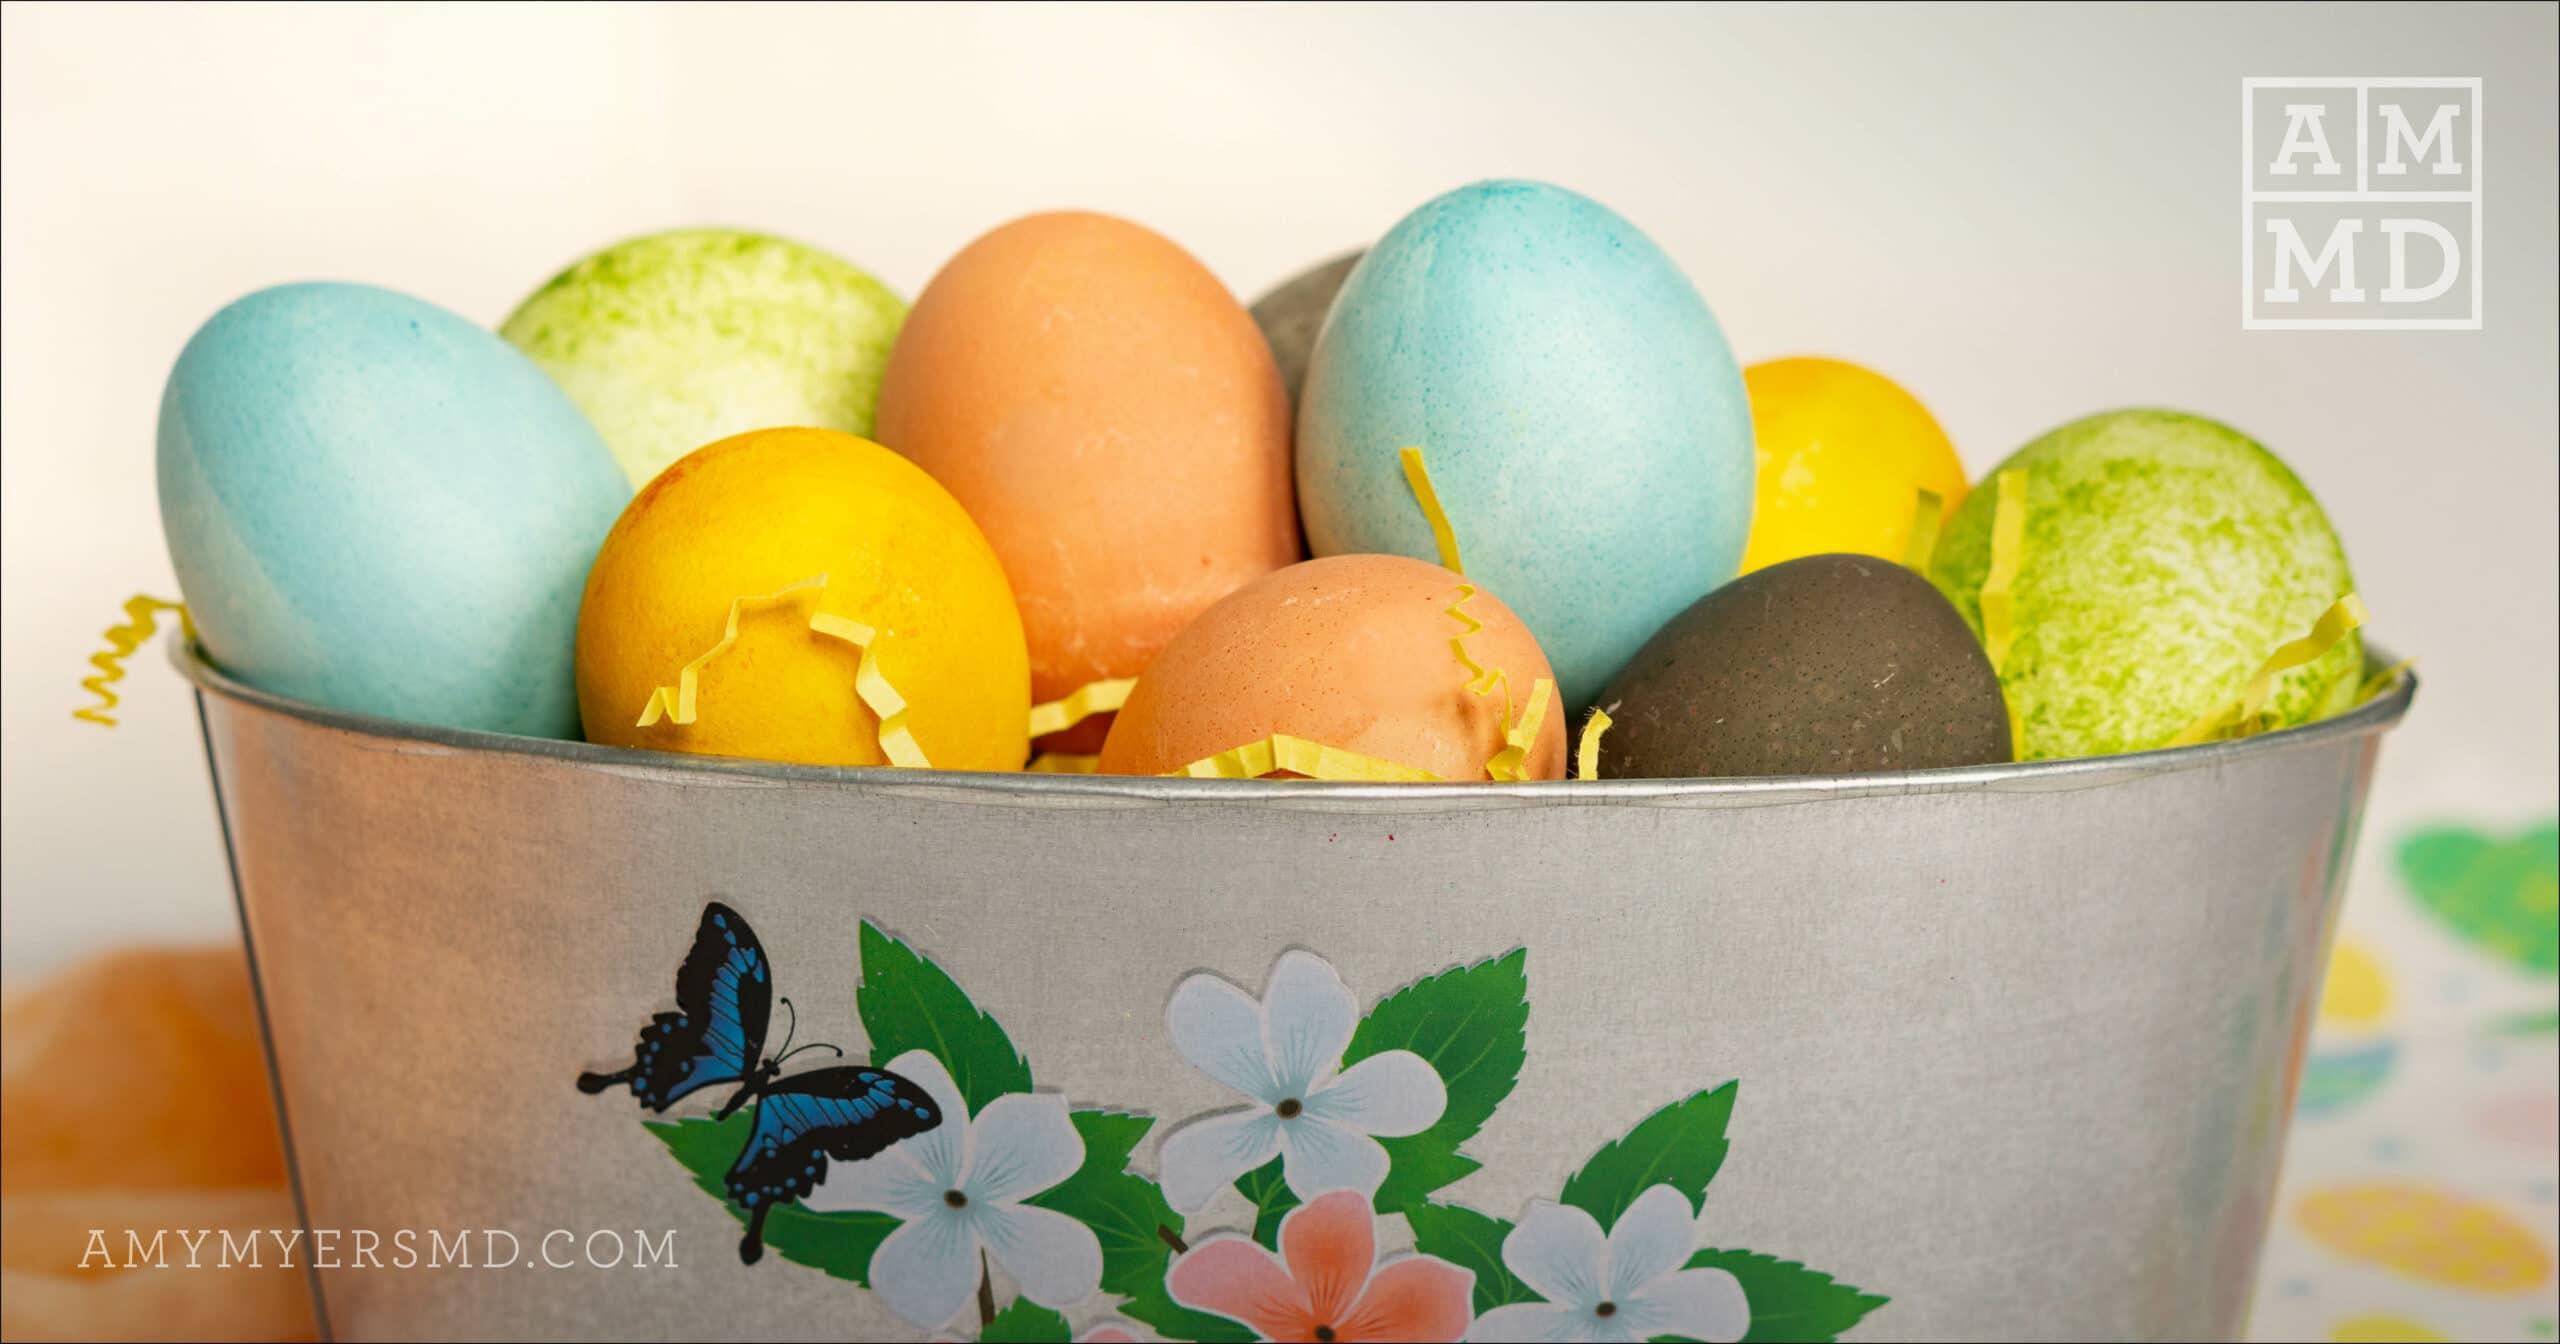 toxin-free Easter eggs